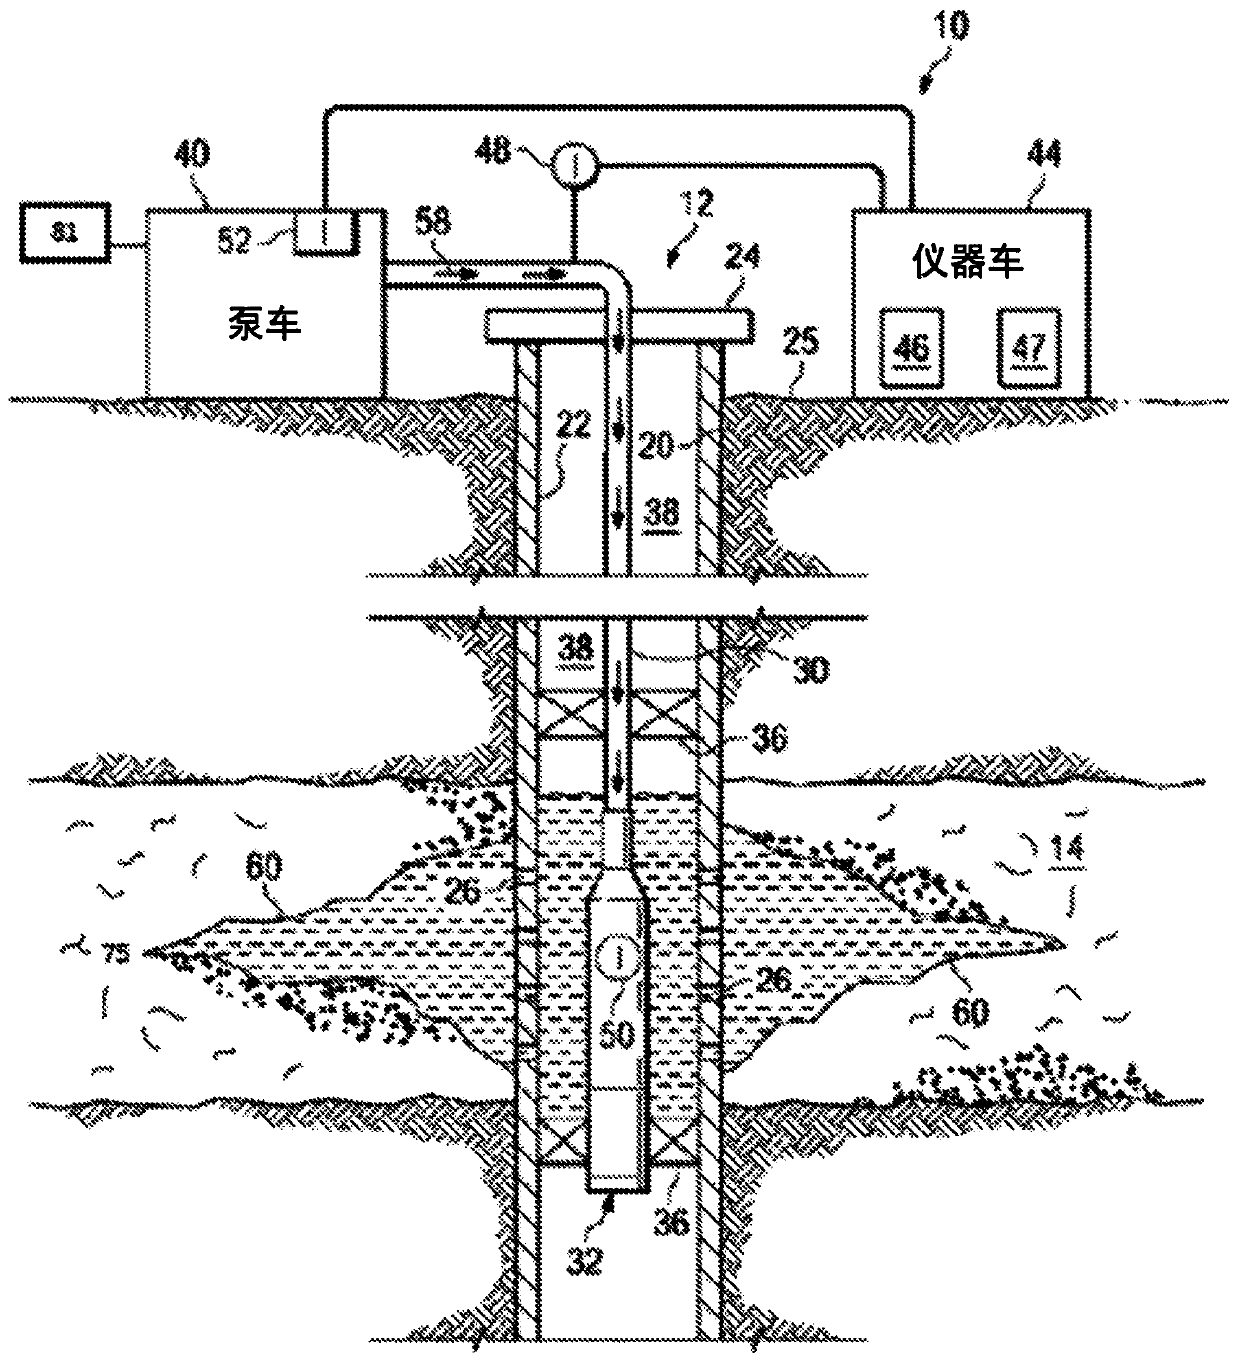 Pulsed hydraulic fracturing with geopolymer precursor fluids